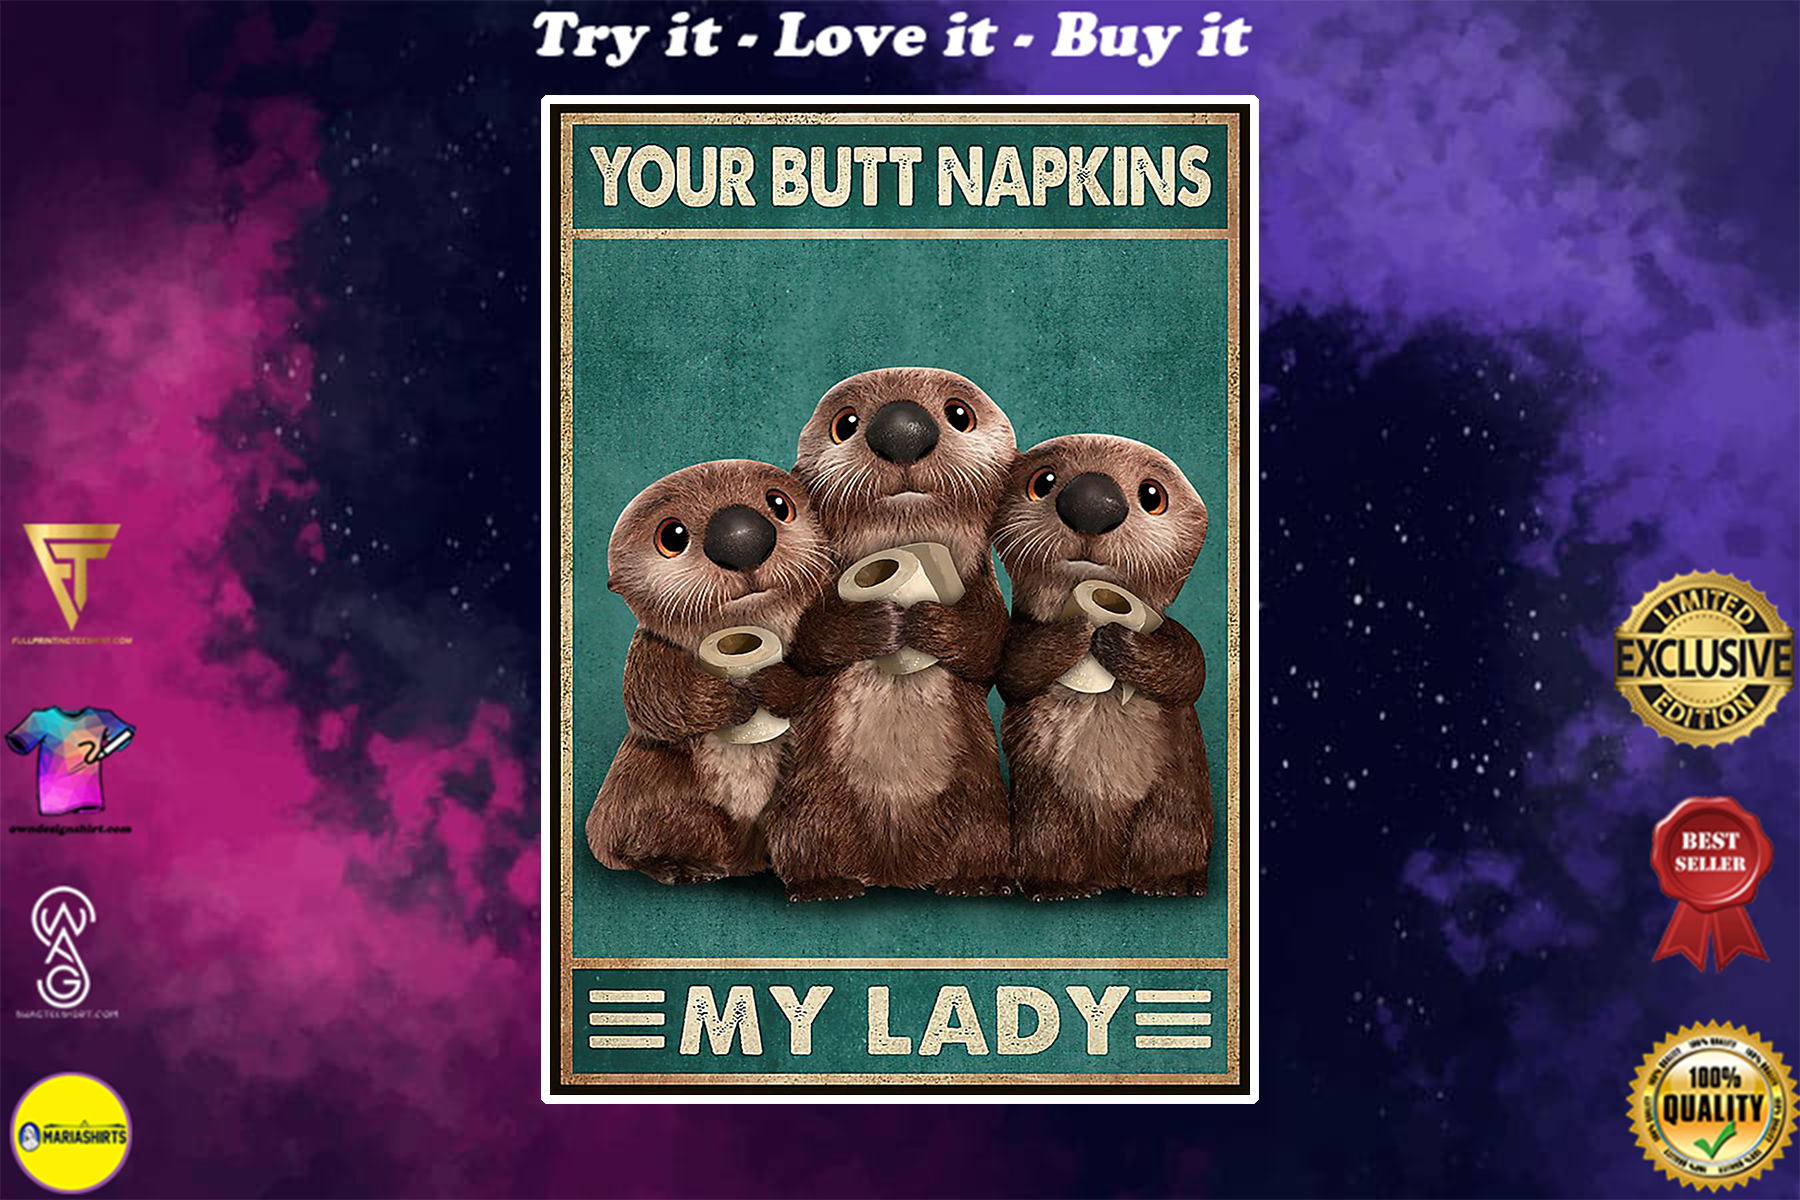 vintage otter with toilet paper your butt napkins my lord poster